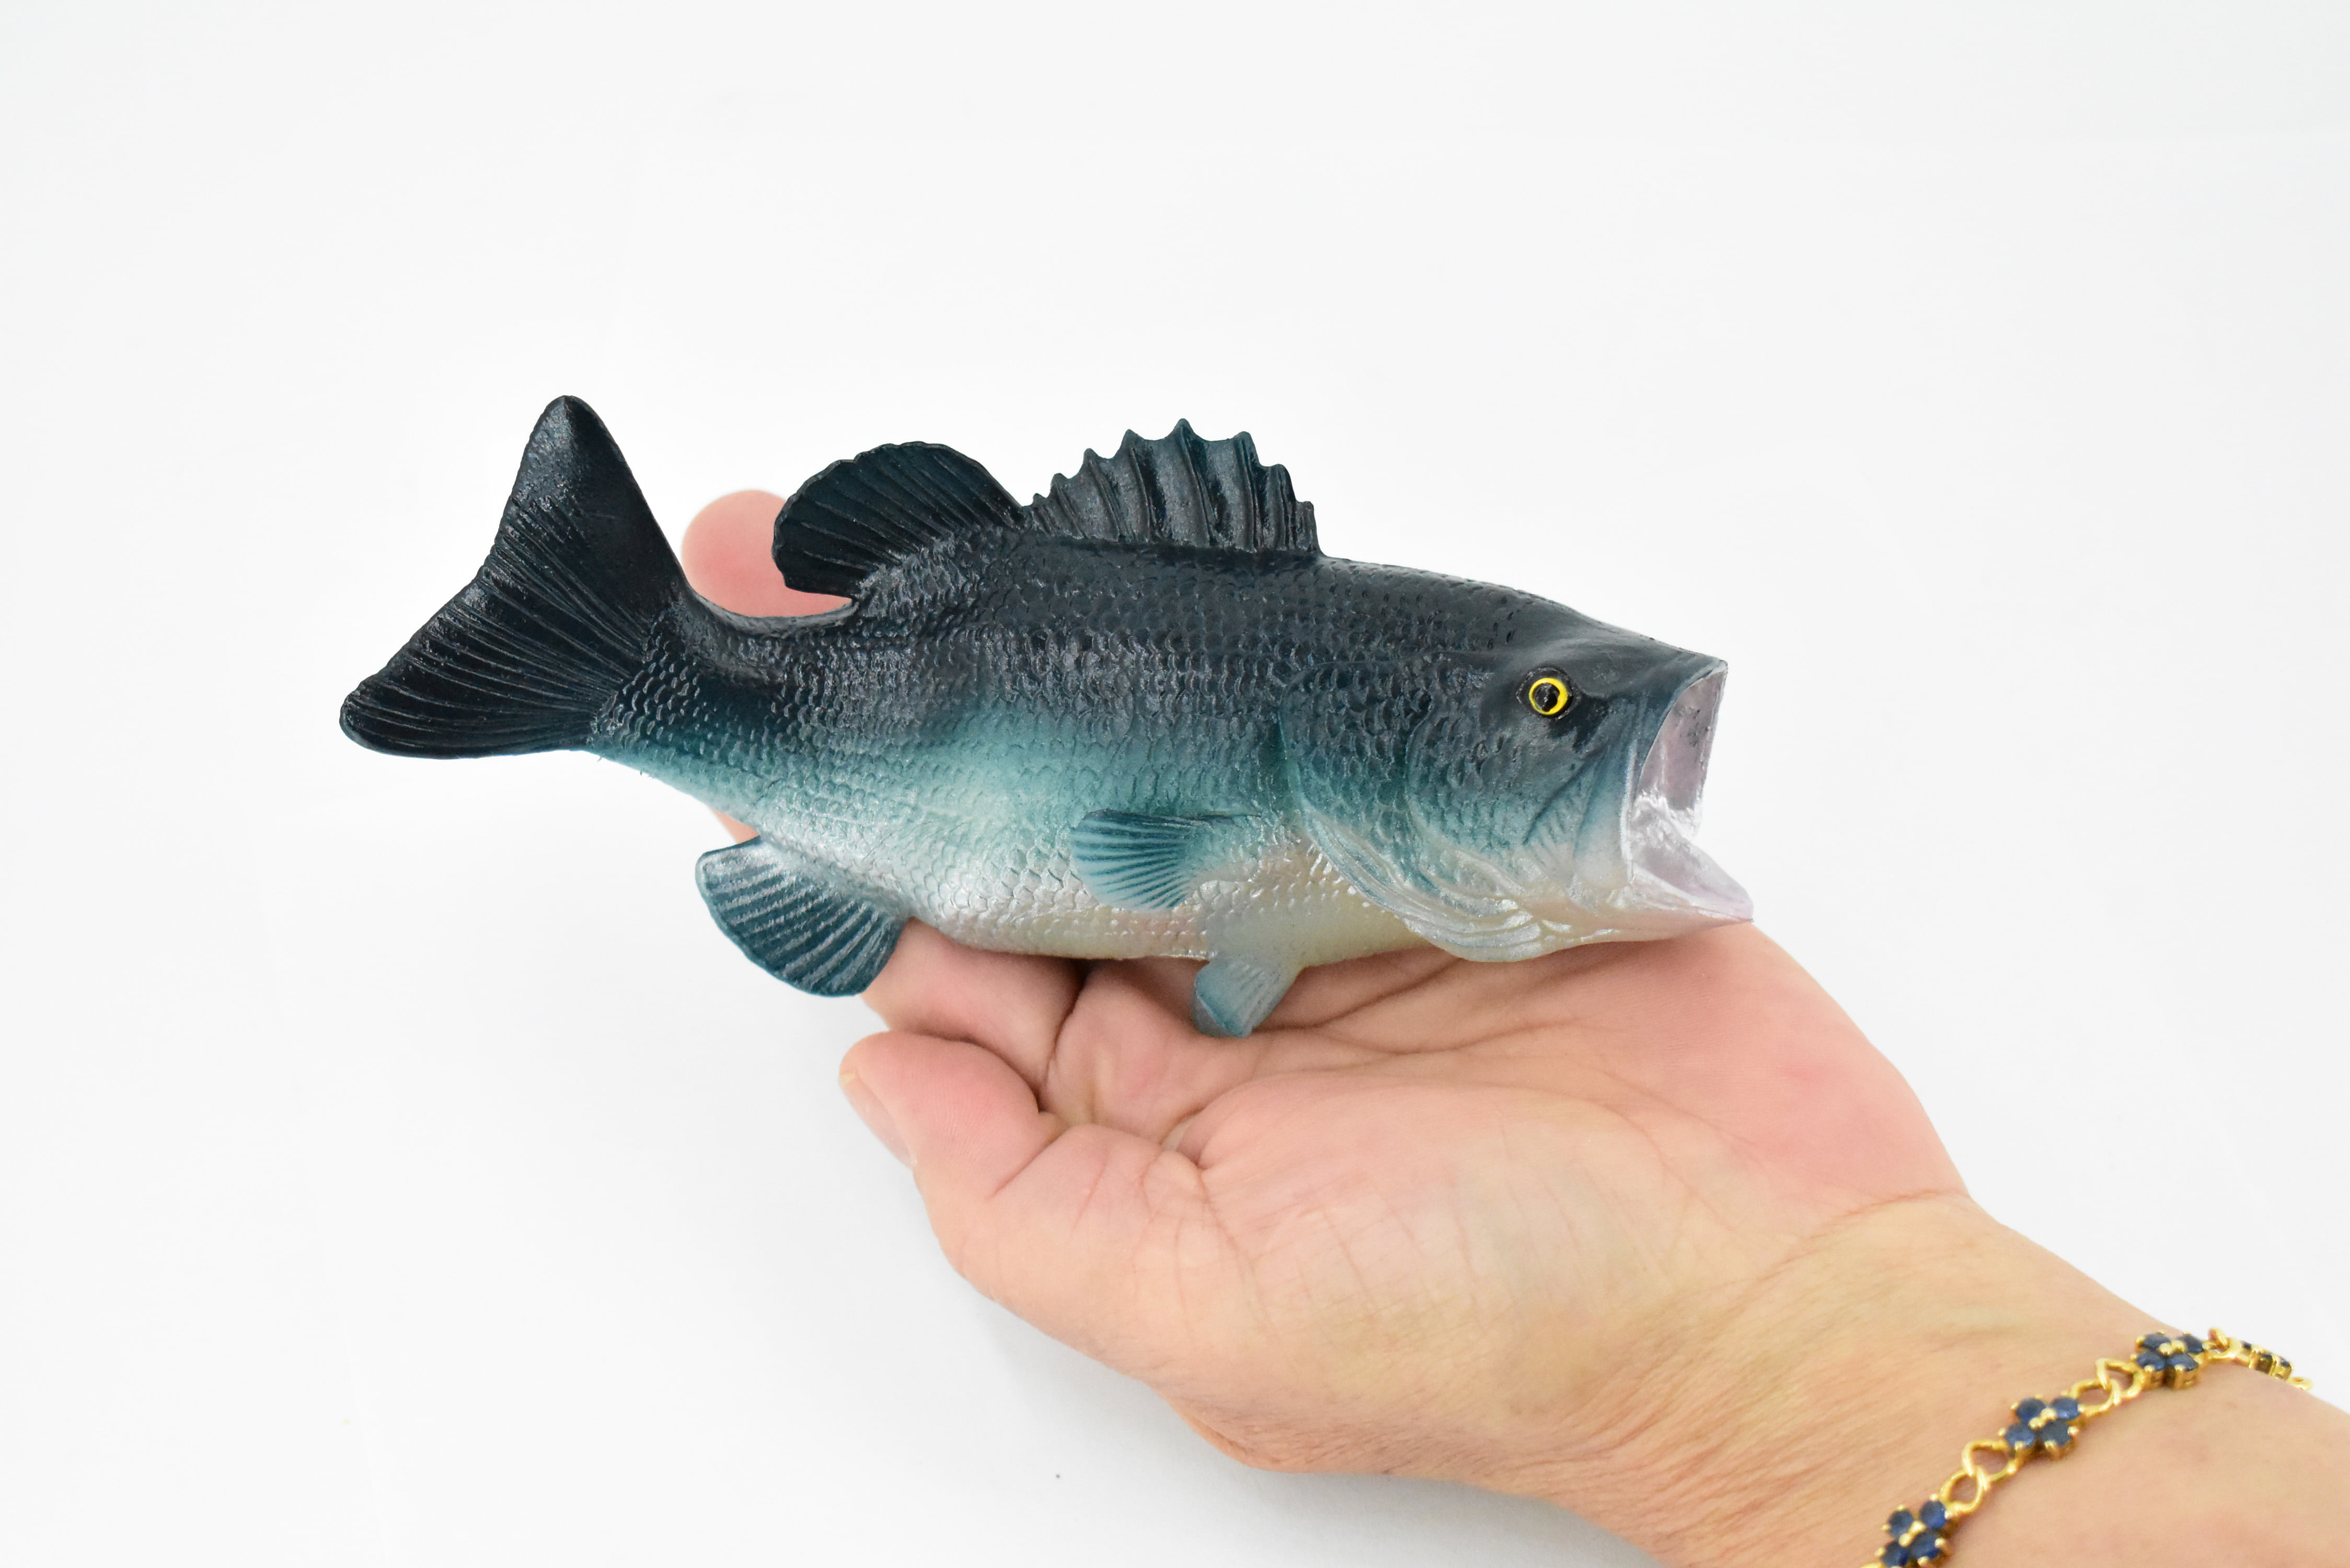 Catfish, Museum Quality, Hand Painted, Rubber Fish, Realistic Toy Figure, Model, Replica, Kids, Educational, Gift, 7 inch CH200 BB117